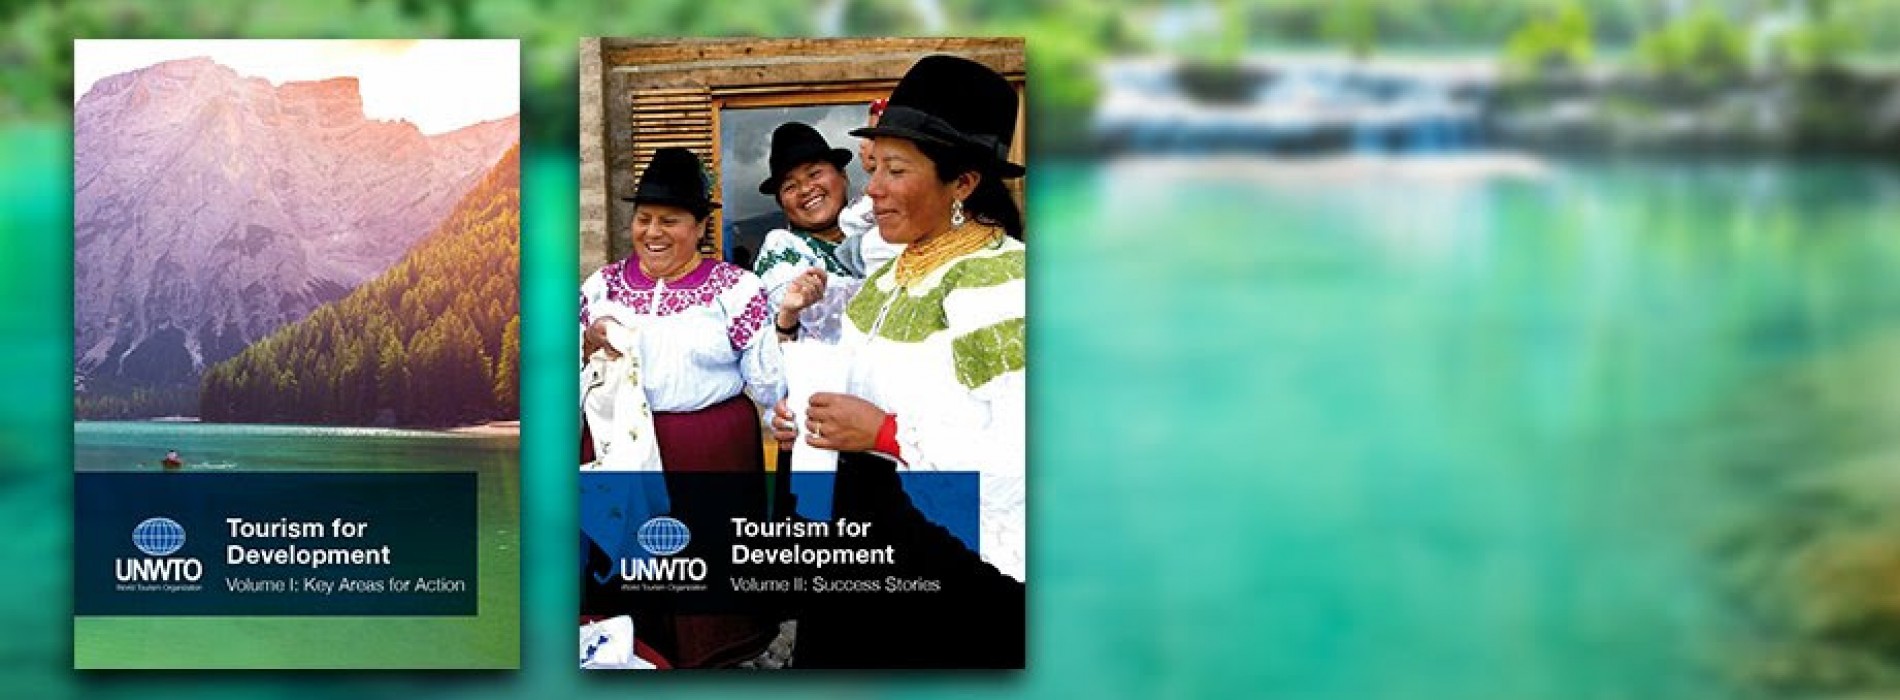 Action on sustainability in tourism needs extra push, says new UNWTO report